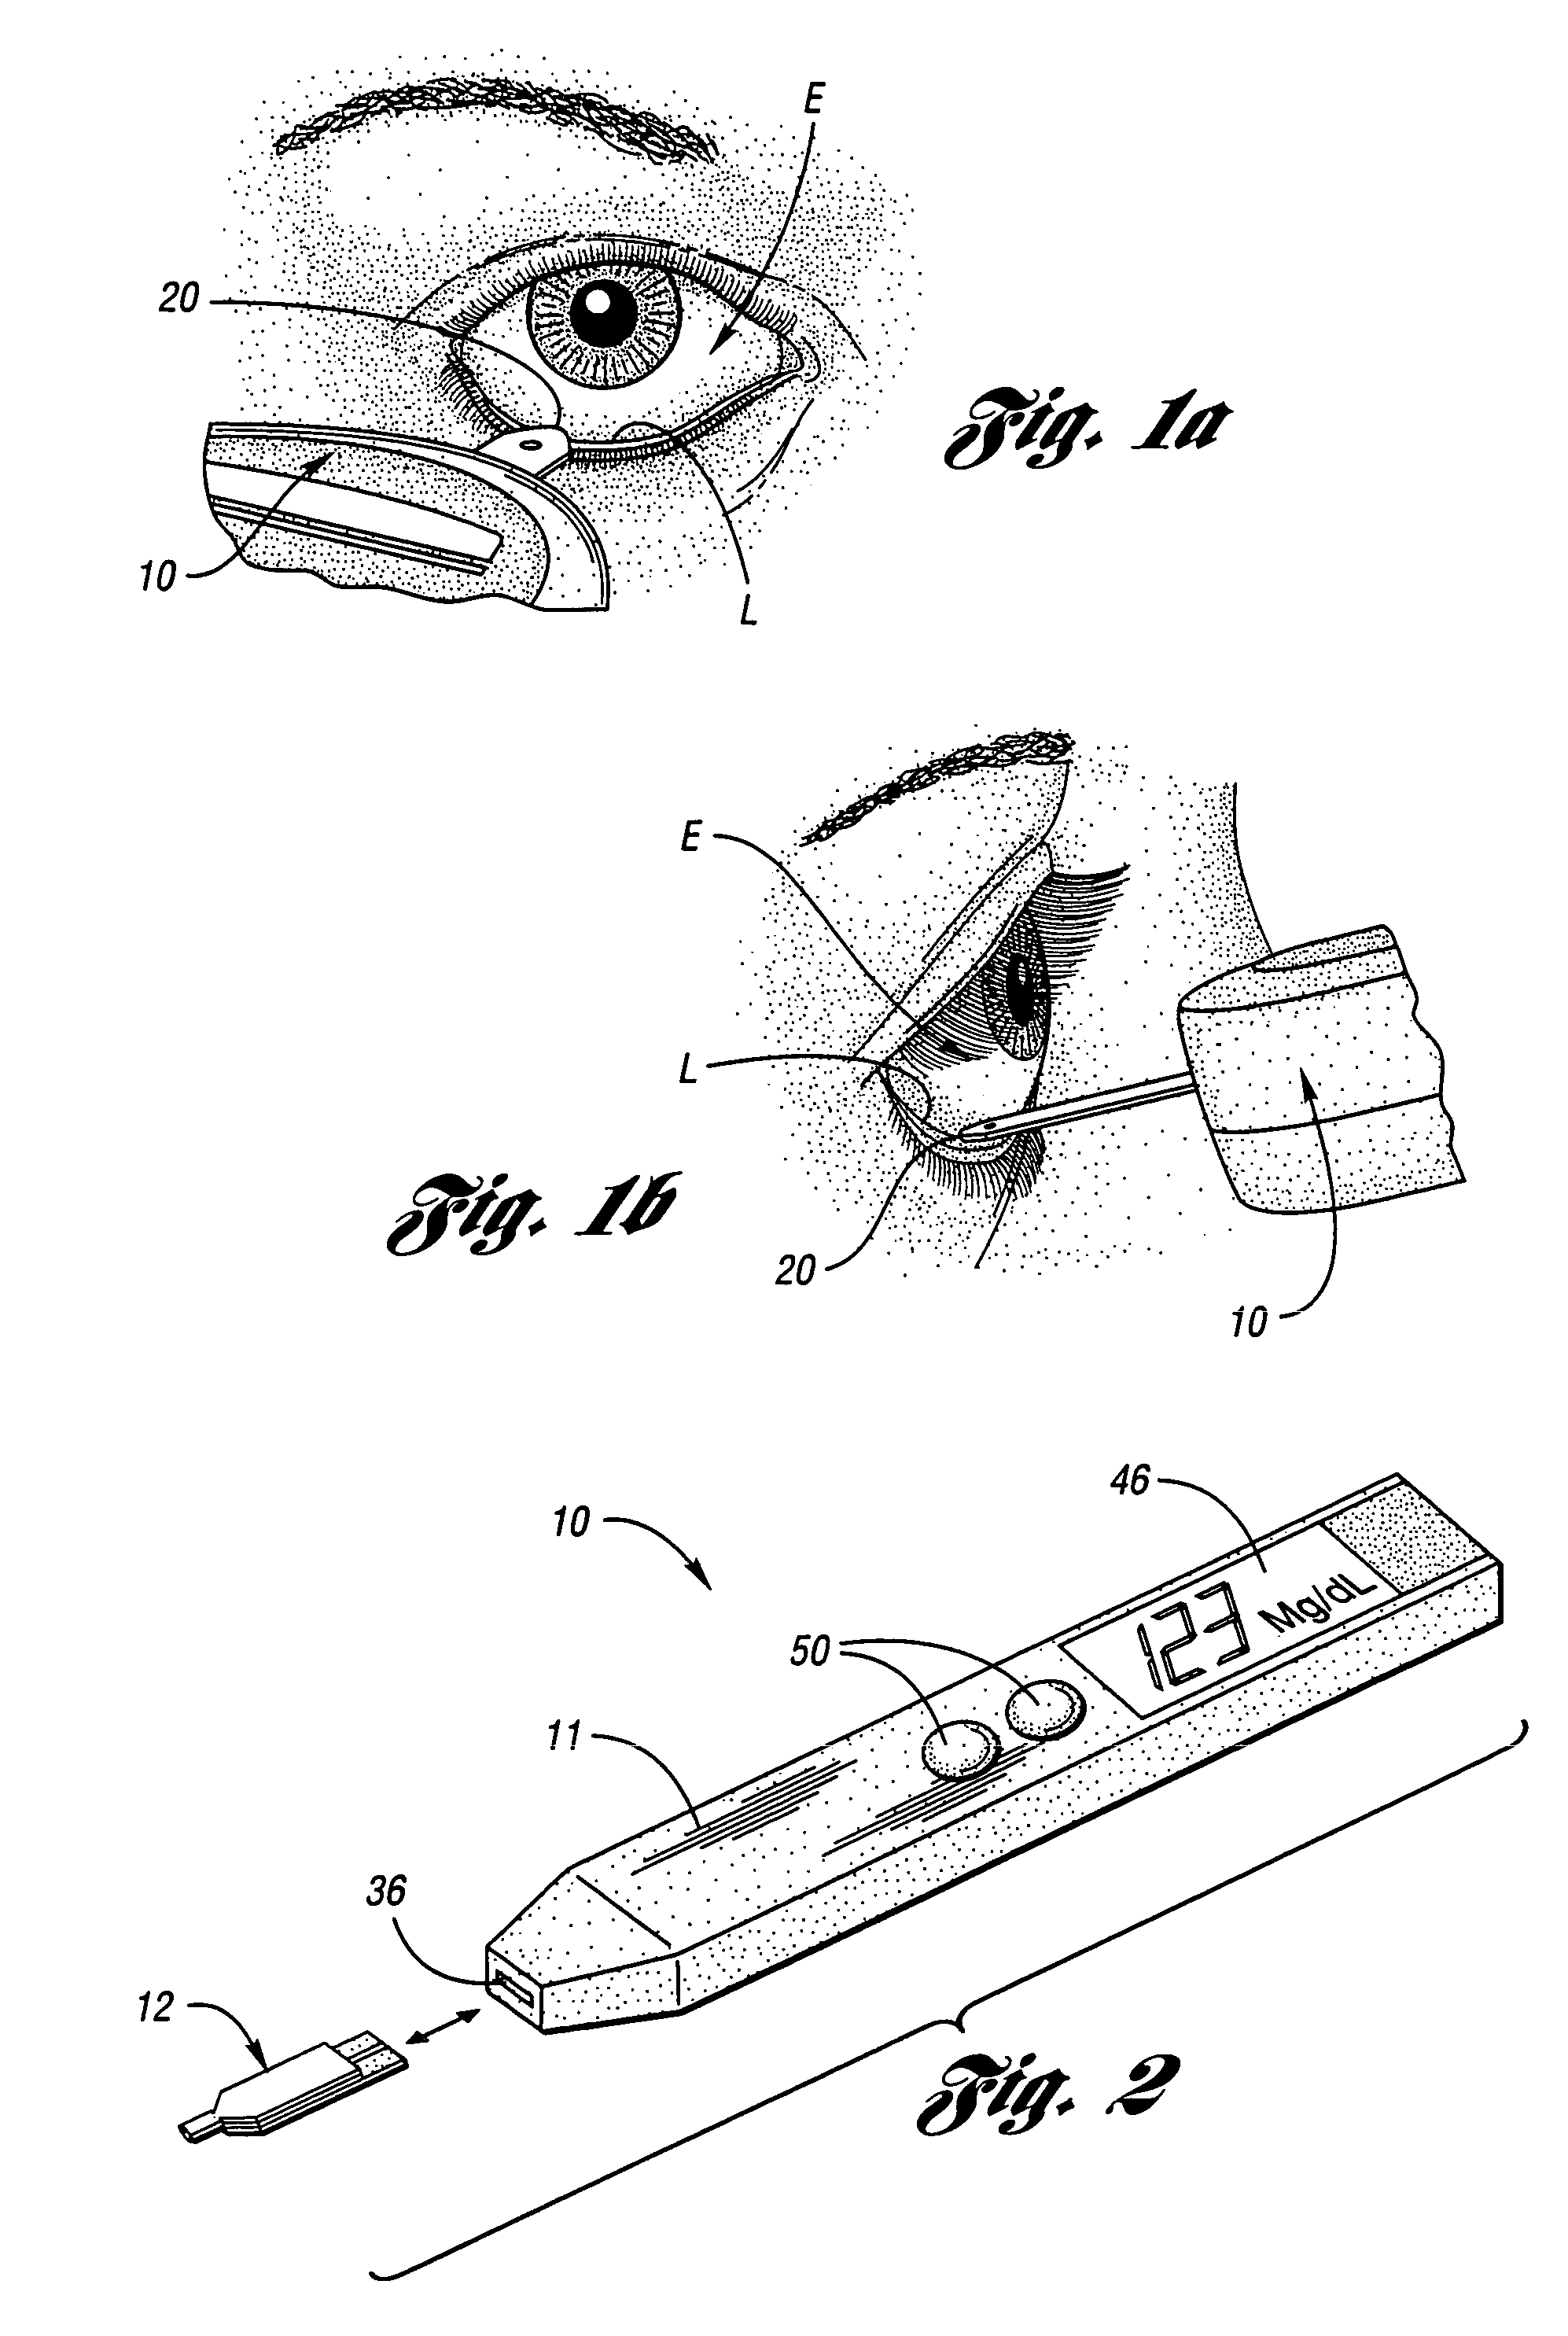 Method and apparatus for non-invasive monitoring of blood substances using self-sampled tears